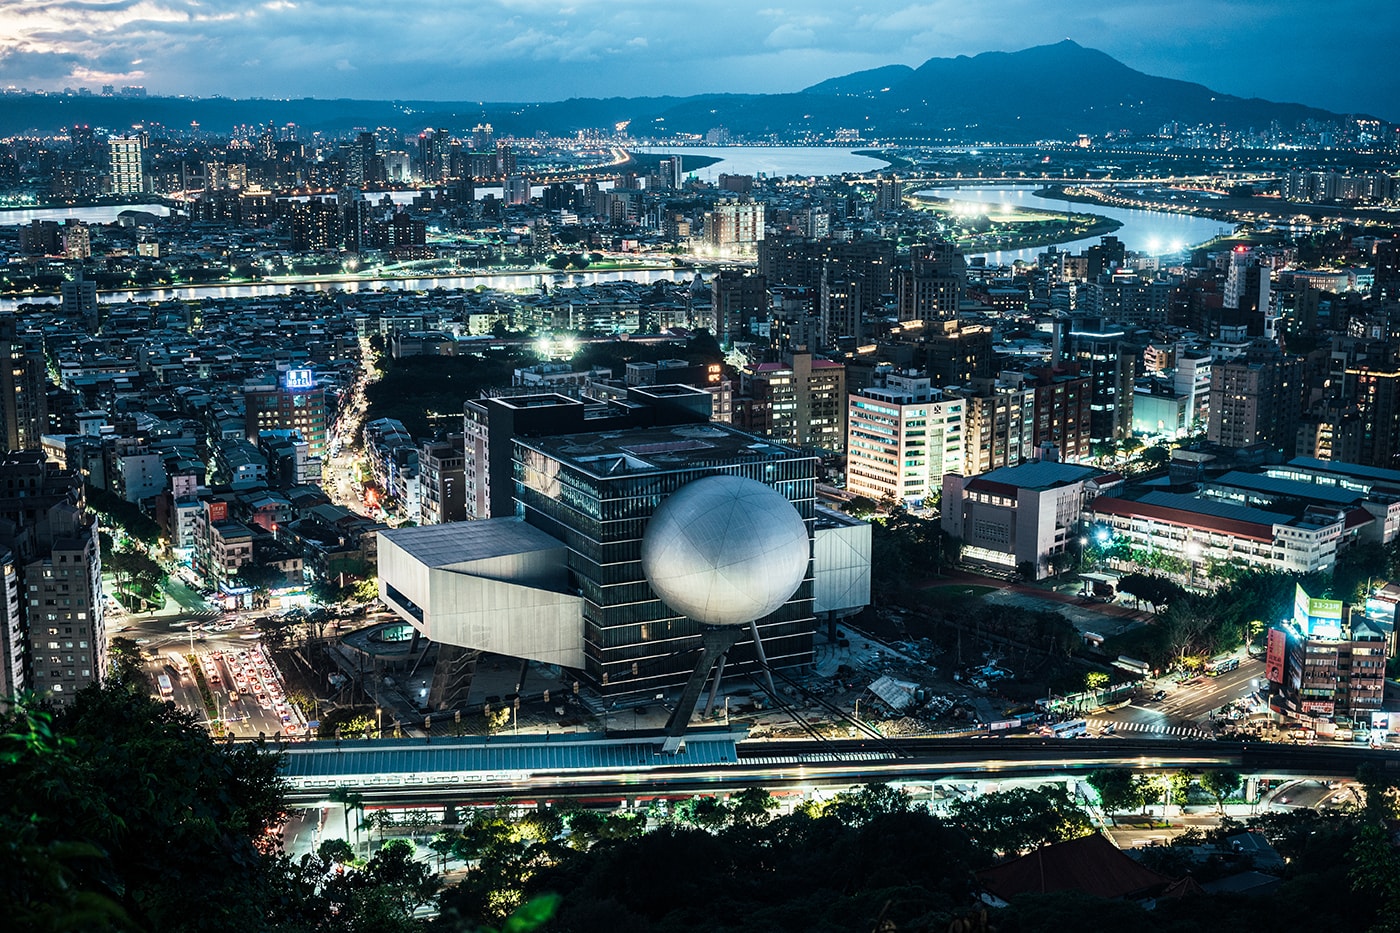 OMA Announces Completion of "Taipei Performing Arts Centre"